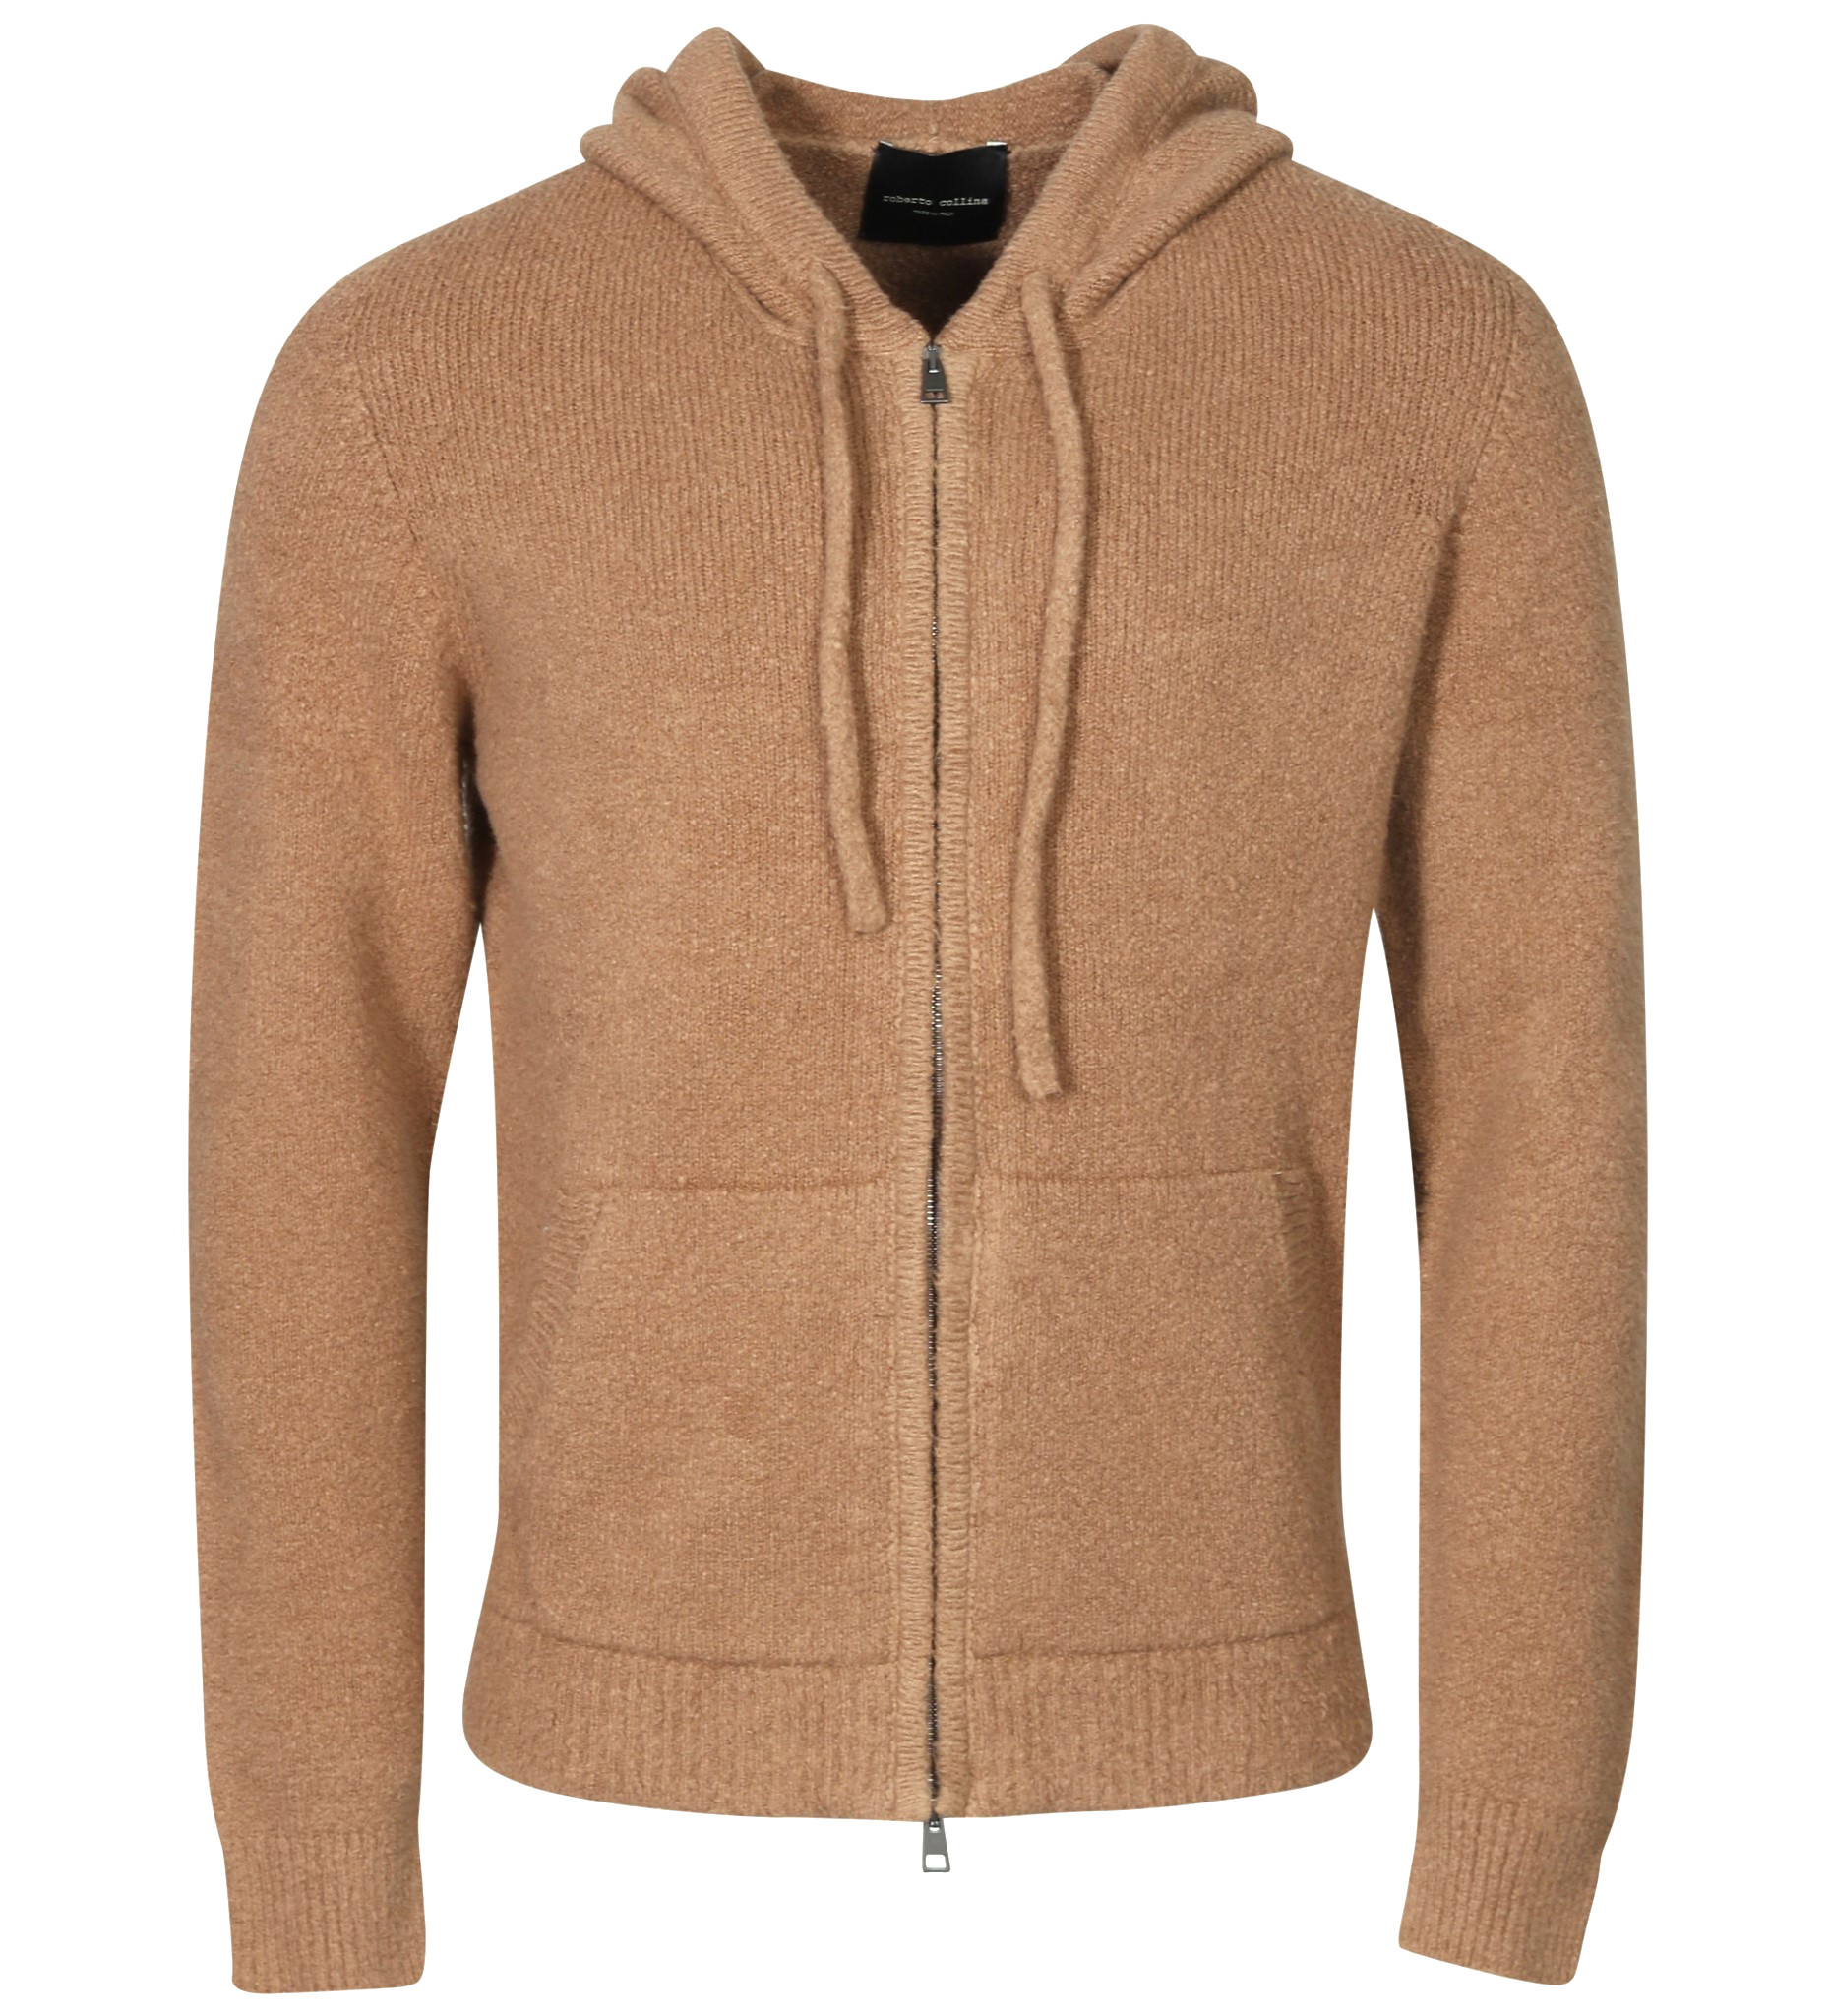 ROBERTO COLLINA Fluffy Cotton Knit Zip Hoodie in Washed Camel 46